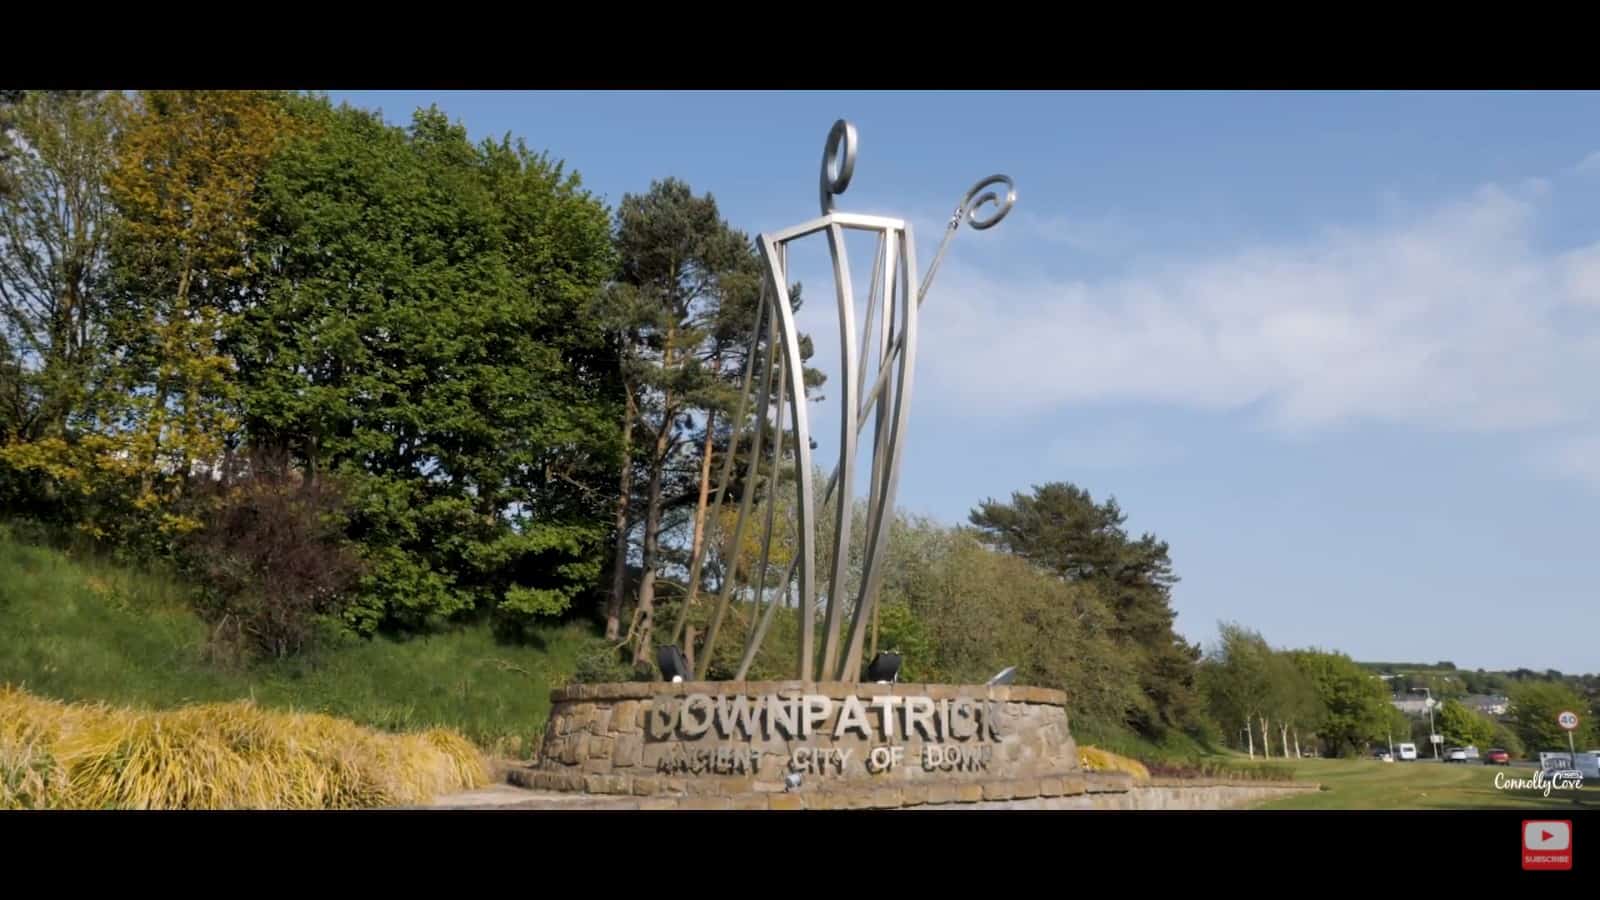 Welcome to Downpatrick Town, the Ancient City of Down